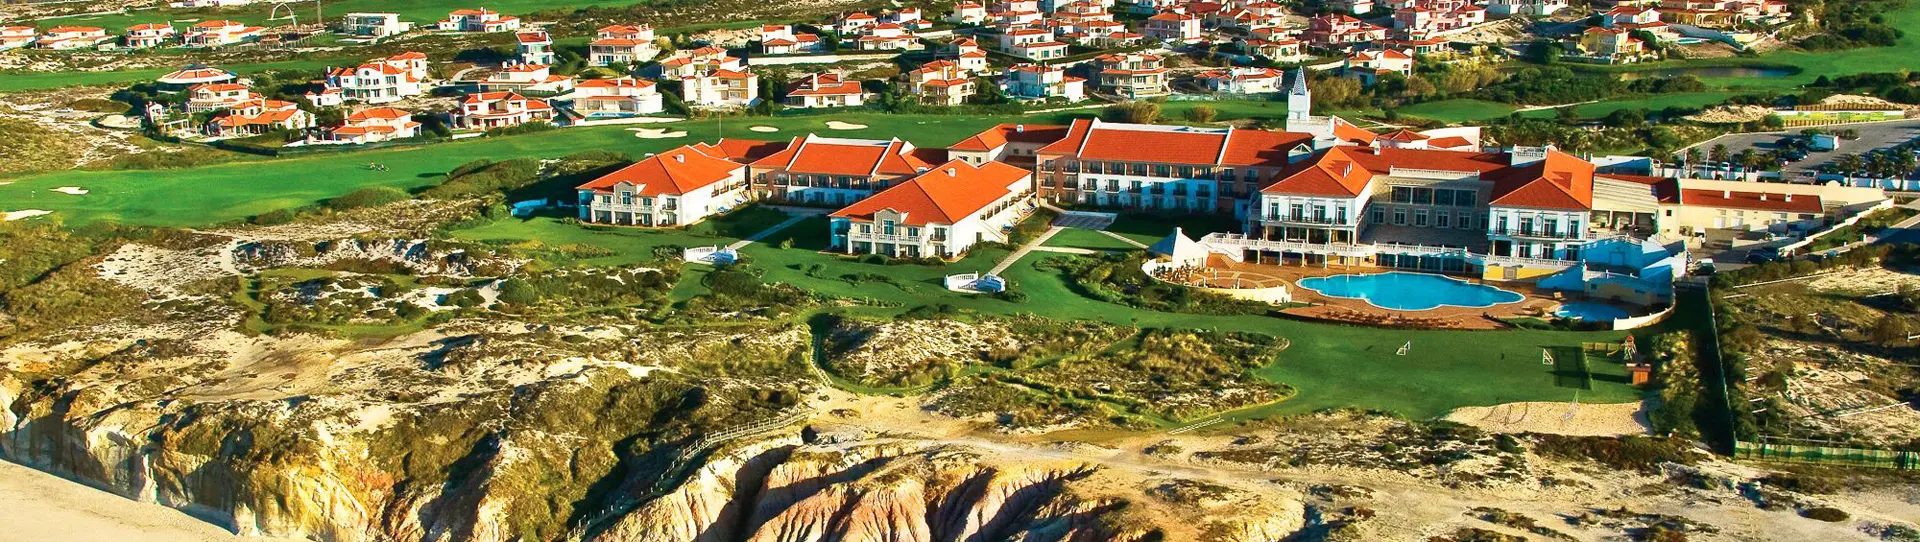 Portugal golf holidays - 7 Nights BB & 5 Golf Rounds<br>Links Golf Package - Photo 3